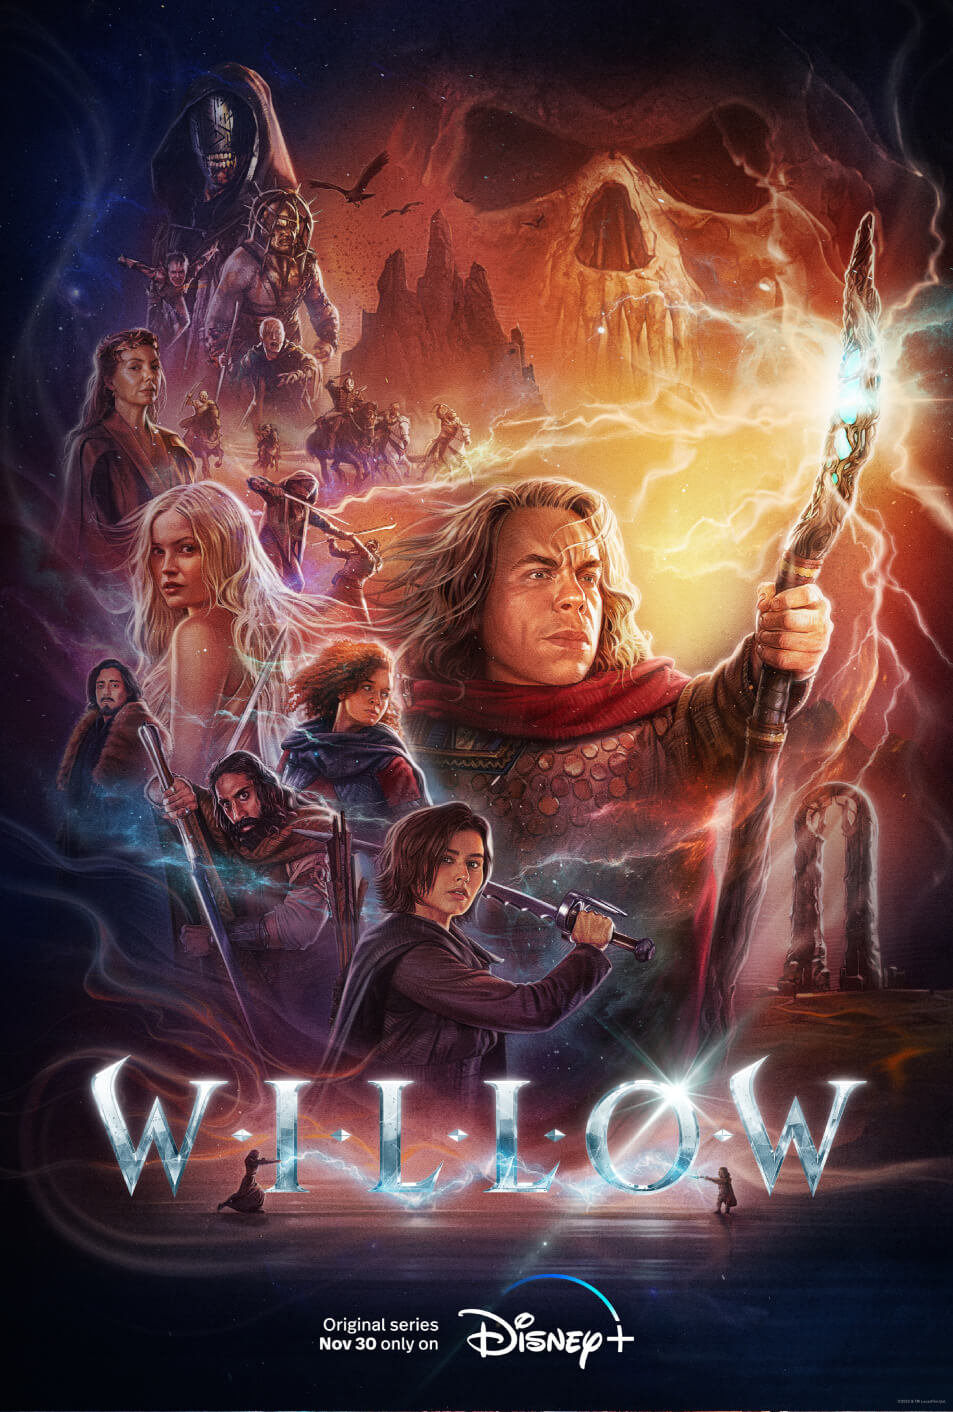 Willow TV Series (2022) Cast & Crew, Release Date, Episodes, Story, Review, Poster, Trailer
